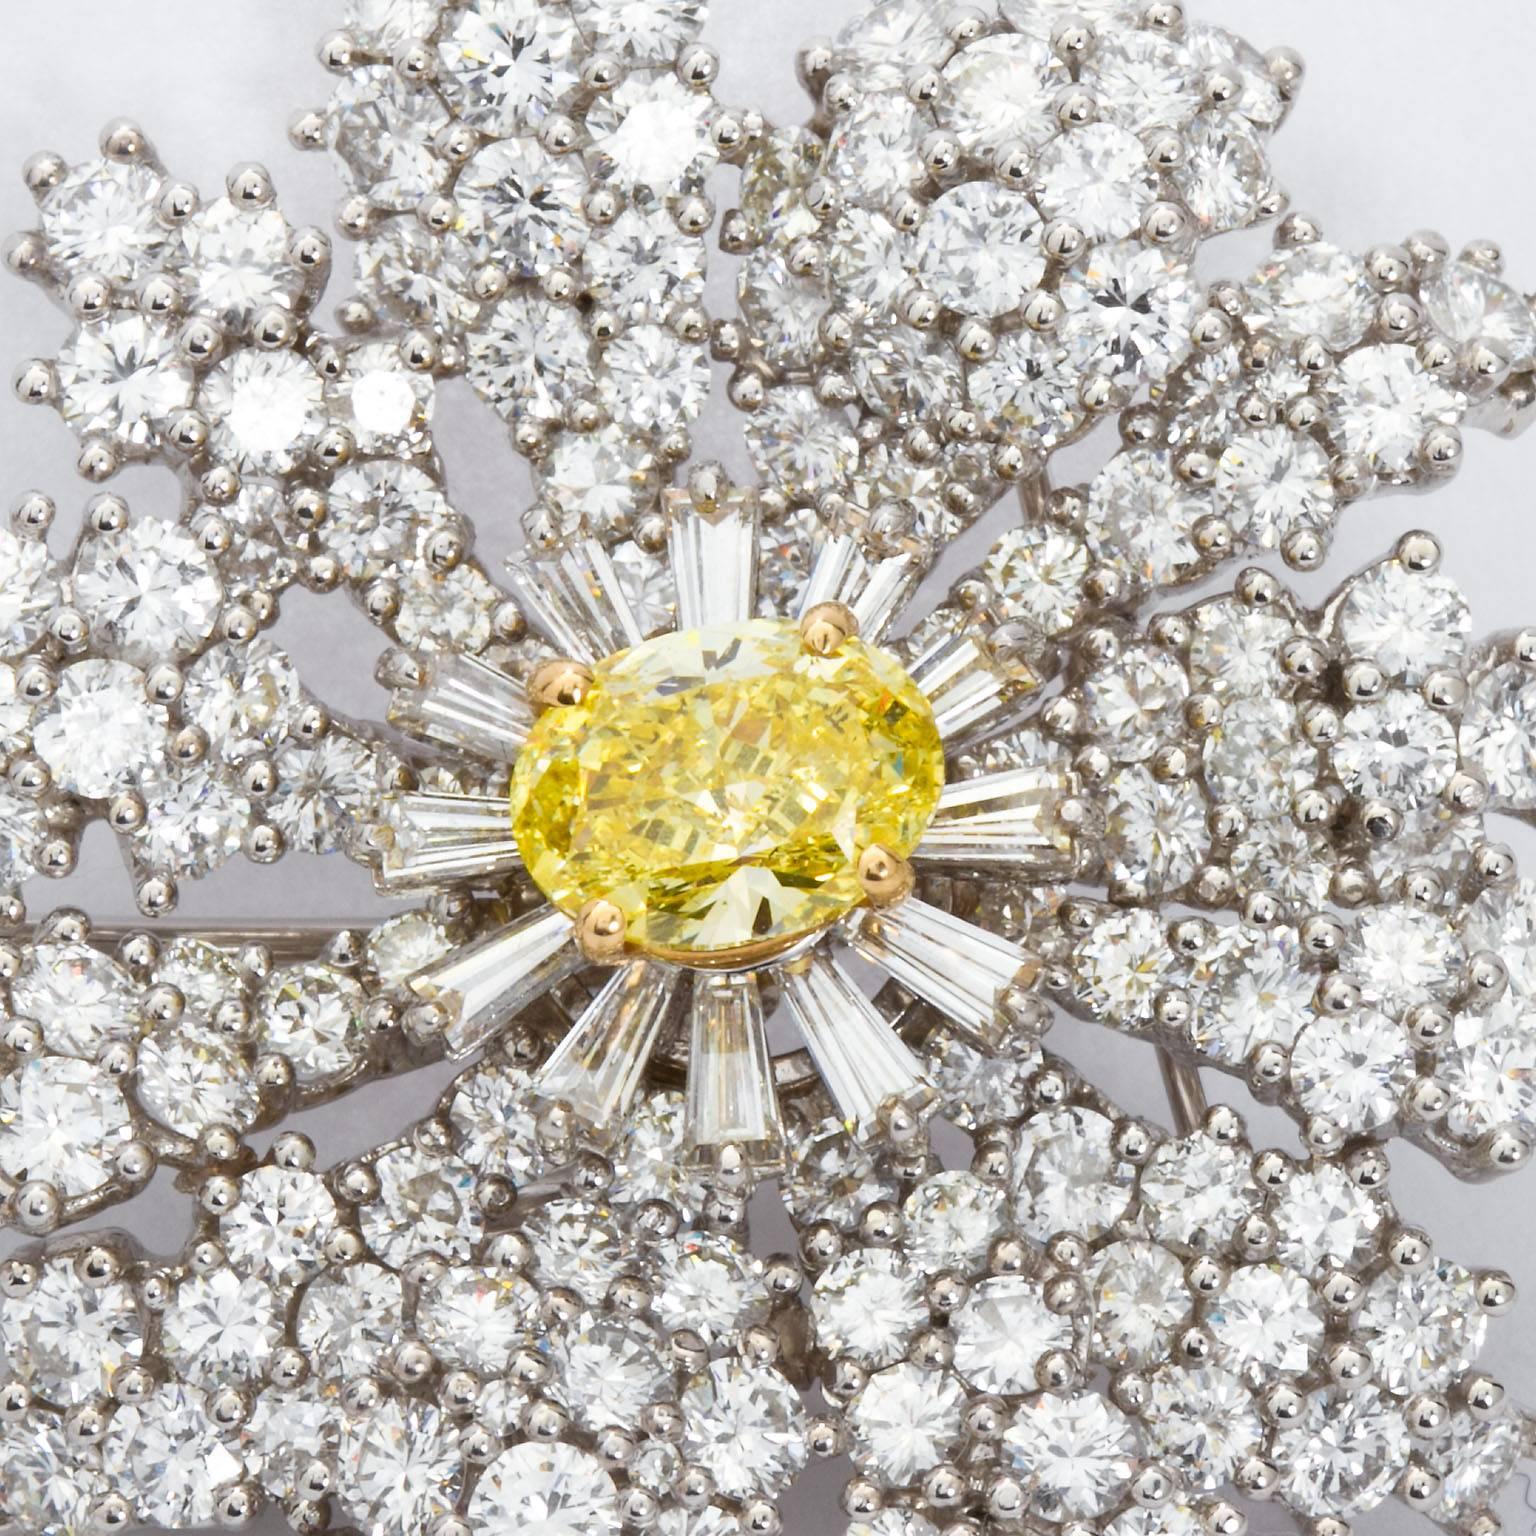 Brooch the subject! A very impressive diamond in platinum flower brooch set with over 20 carats of high quality diamonds and graced with a center approx. 2.00 carats fancy intense yellow oval cut diamond.  Brooch contains round brilliant, calibrated